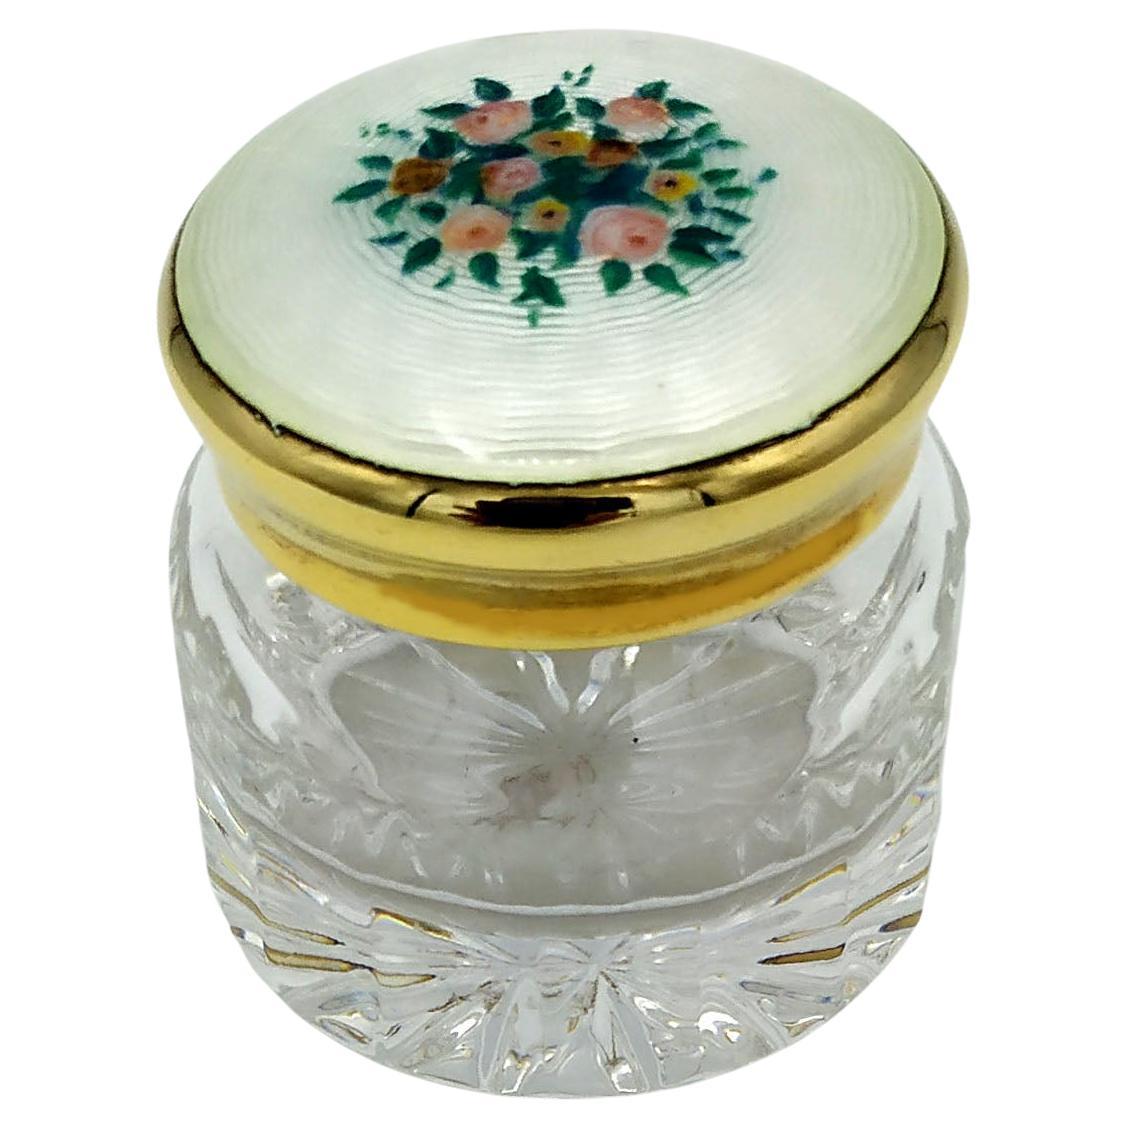 Wedding Favor or Small Container in Cut Crystal and Sterling Silver Lid with Han